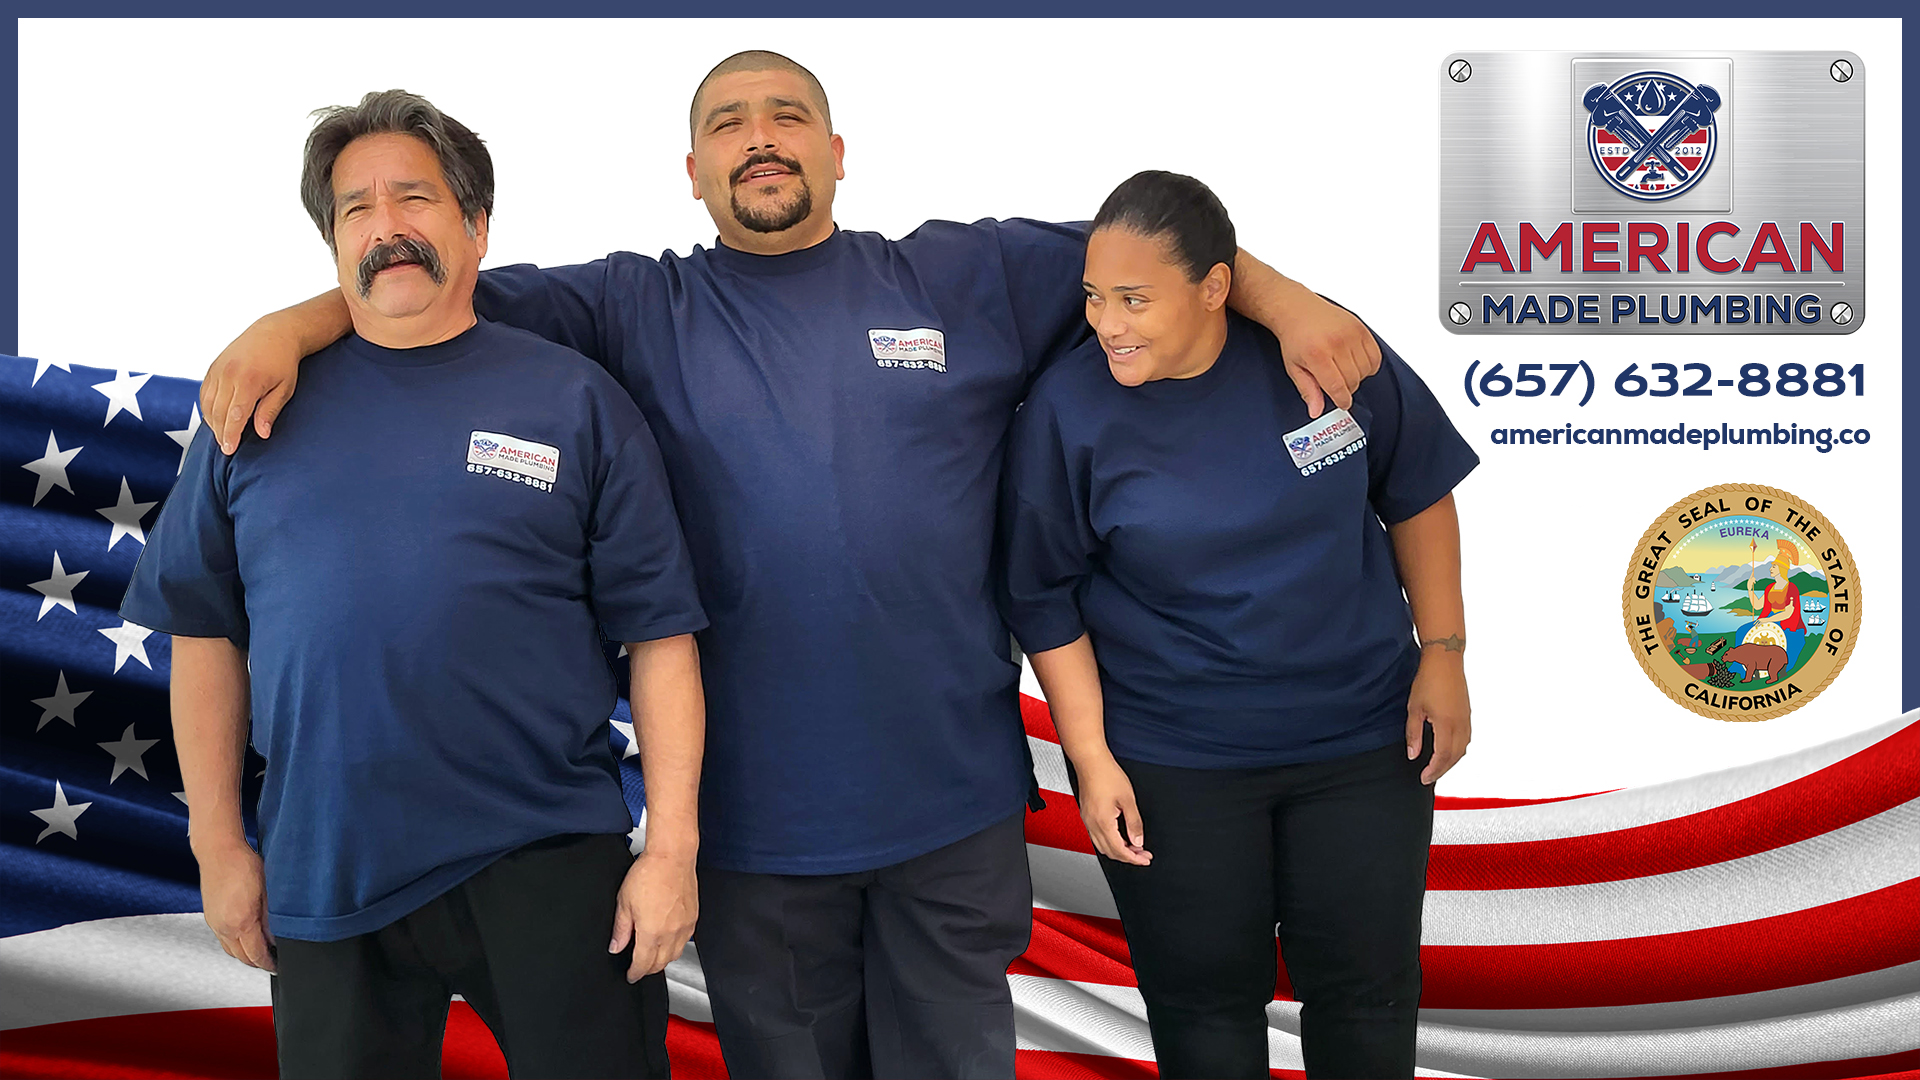 American Made Plumbing Team with the logo